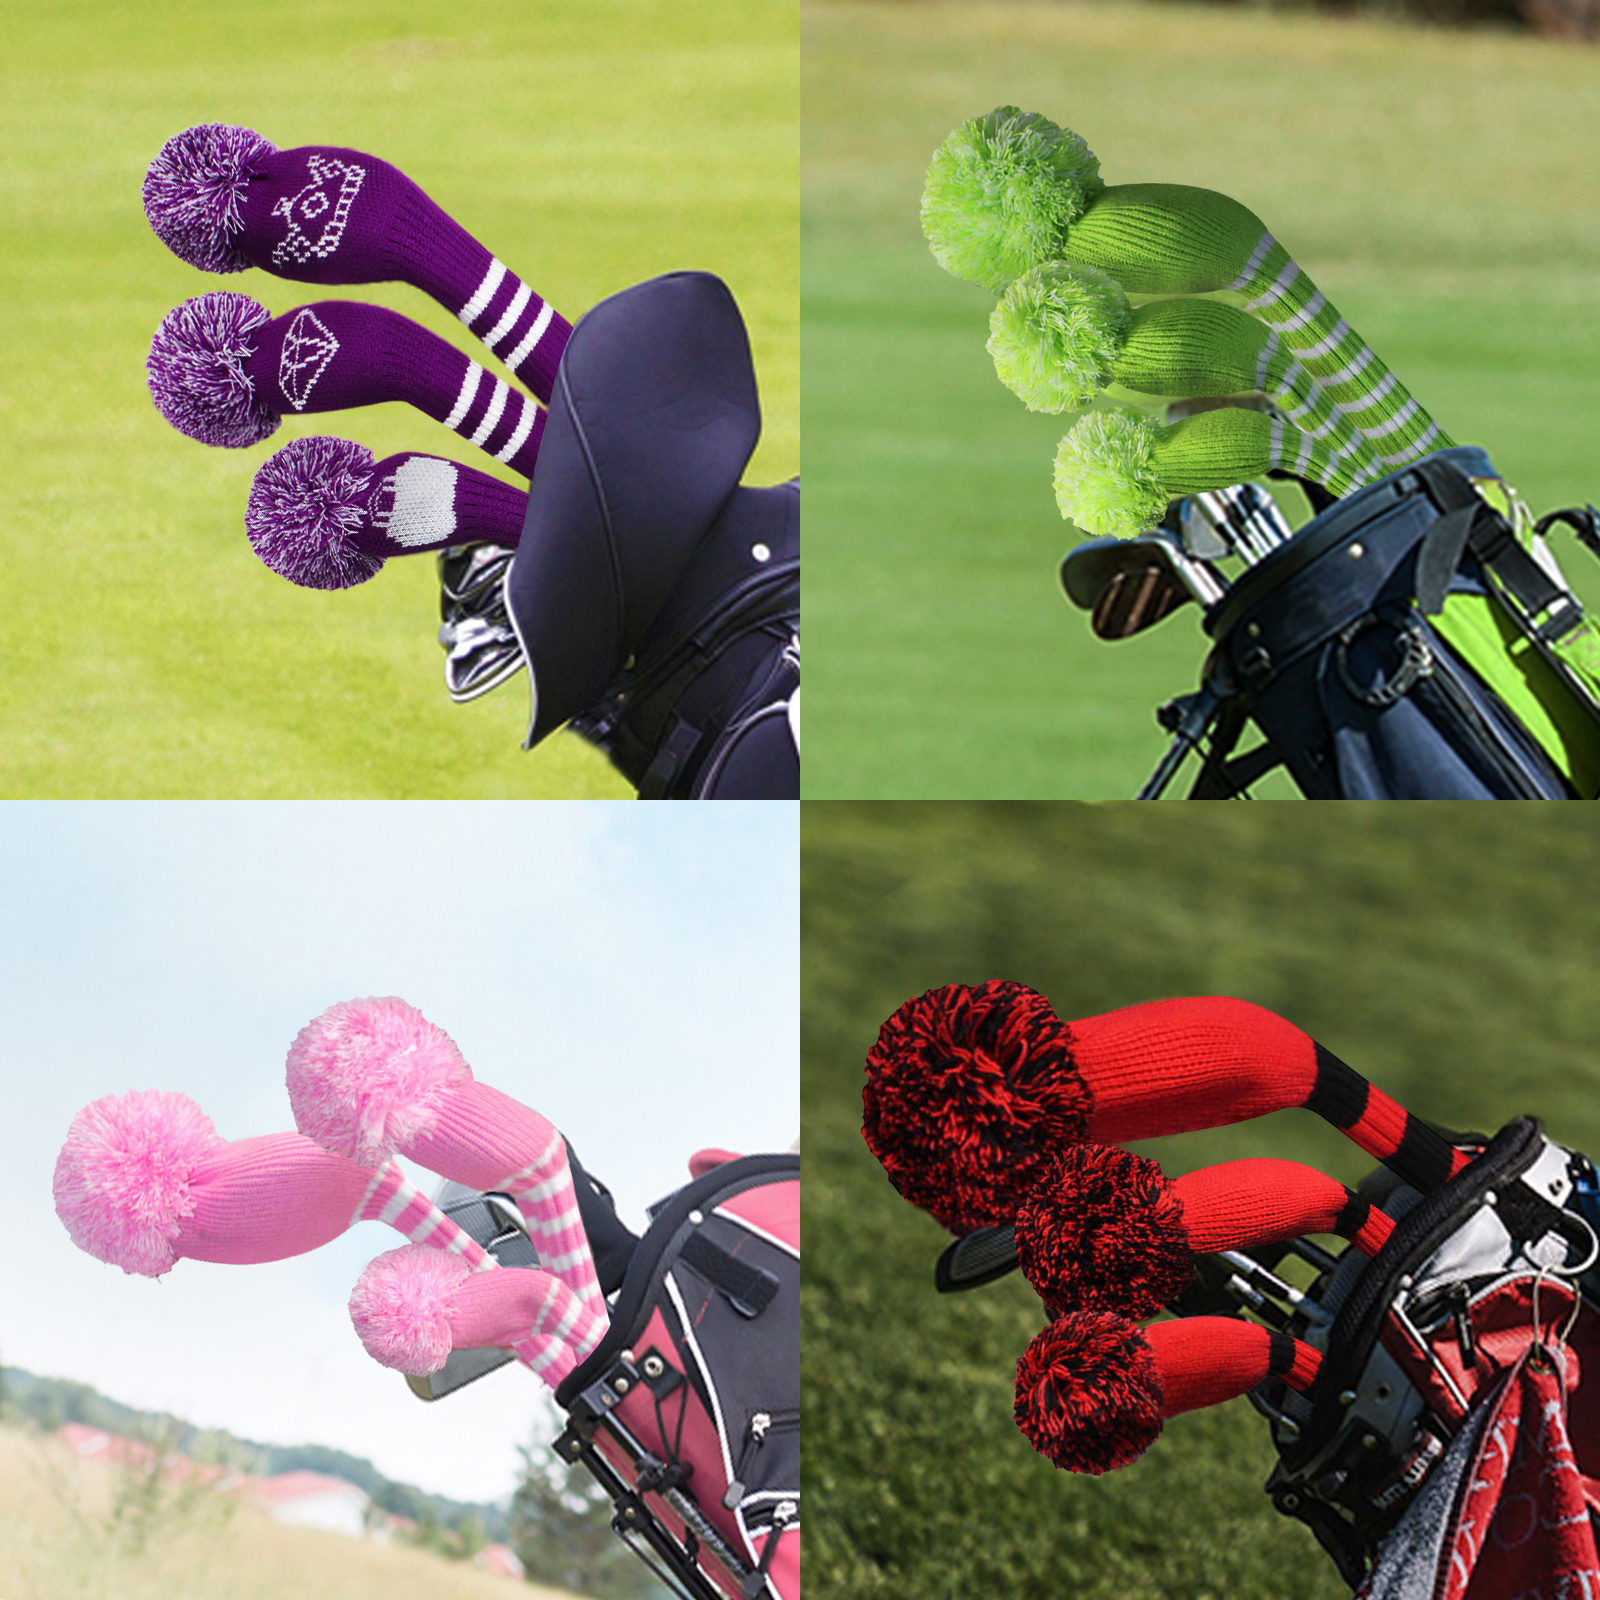 Scott Edward Custom Pom Pom Golf Head Covers Fit Max Drivers Fairways Hybrids/Utility with Rotating Number Tags (Lime Green)